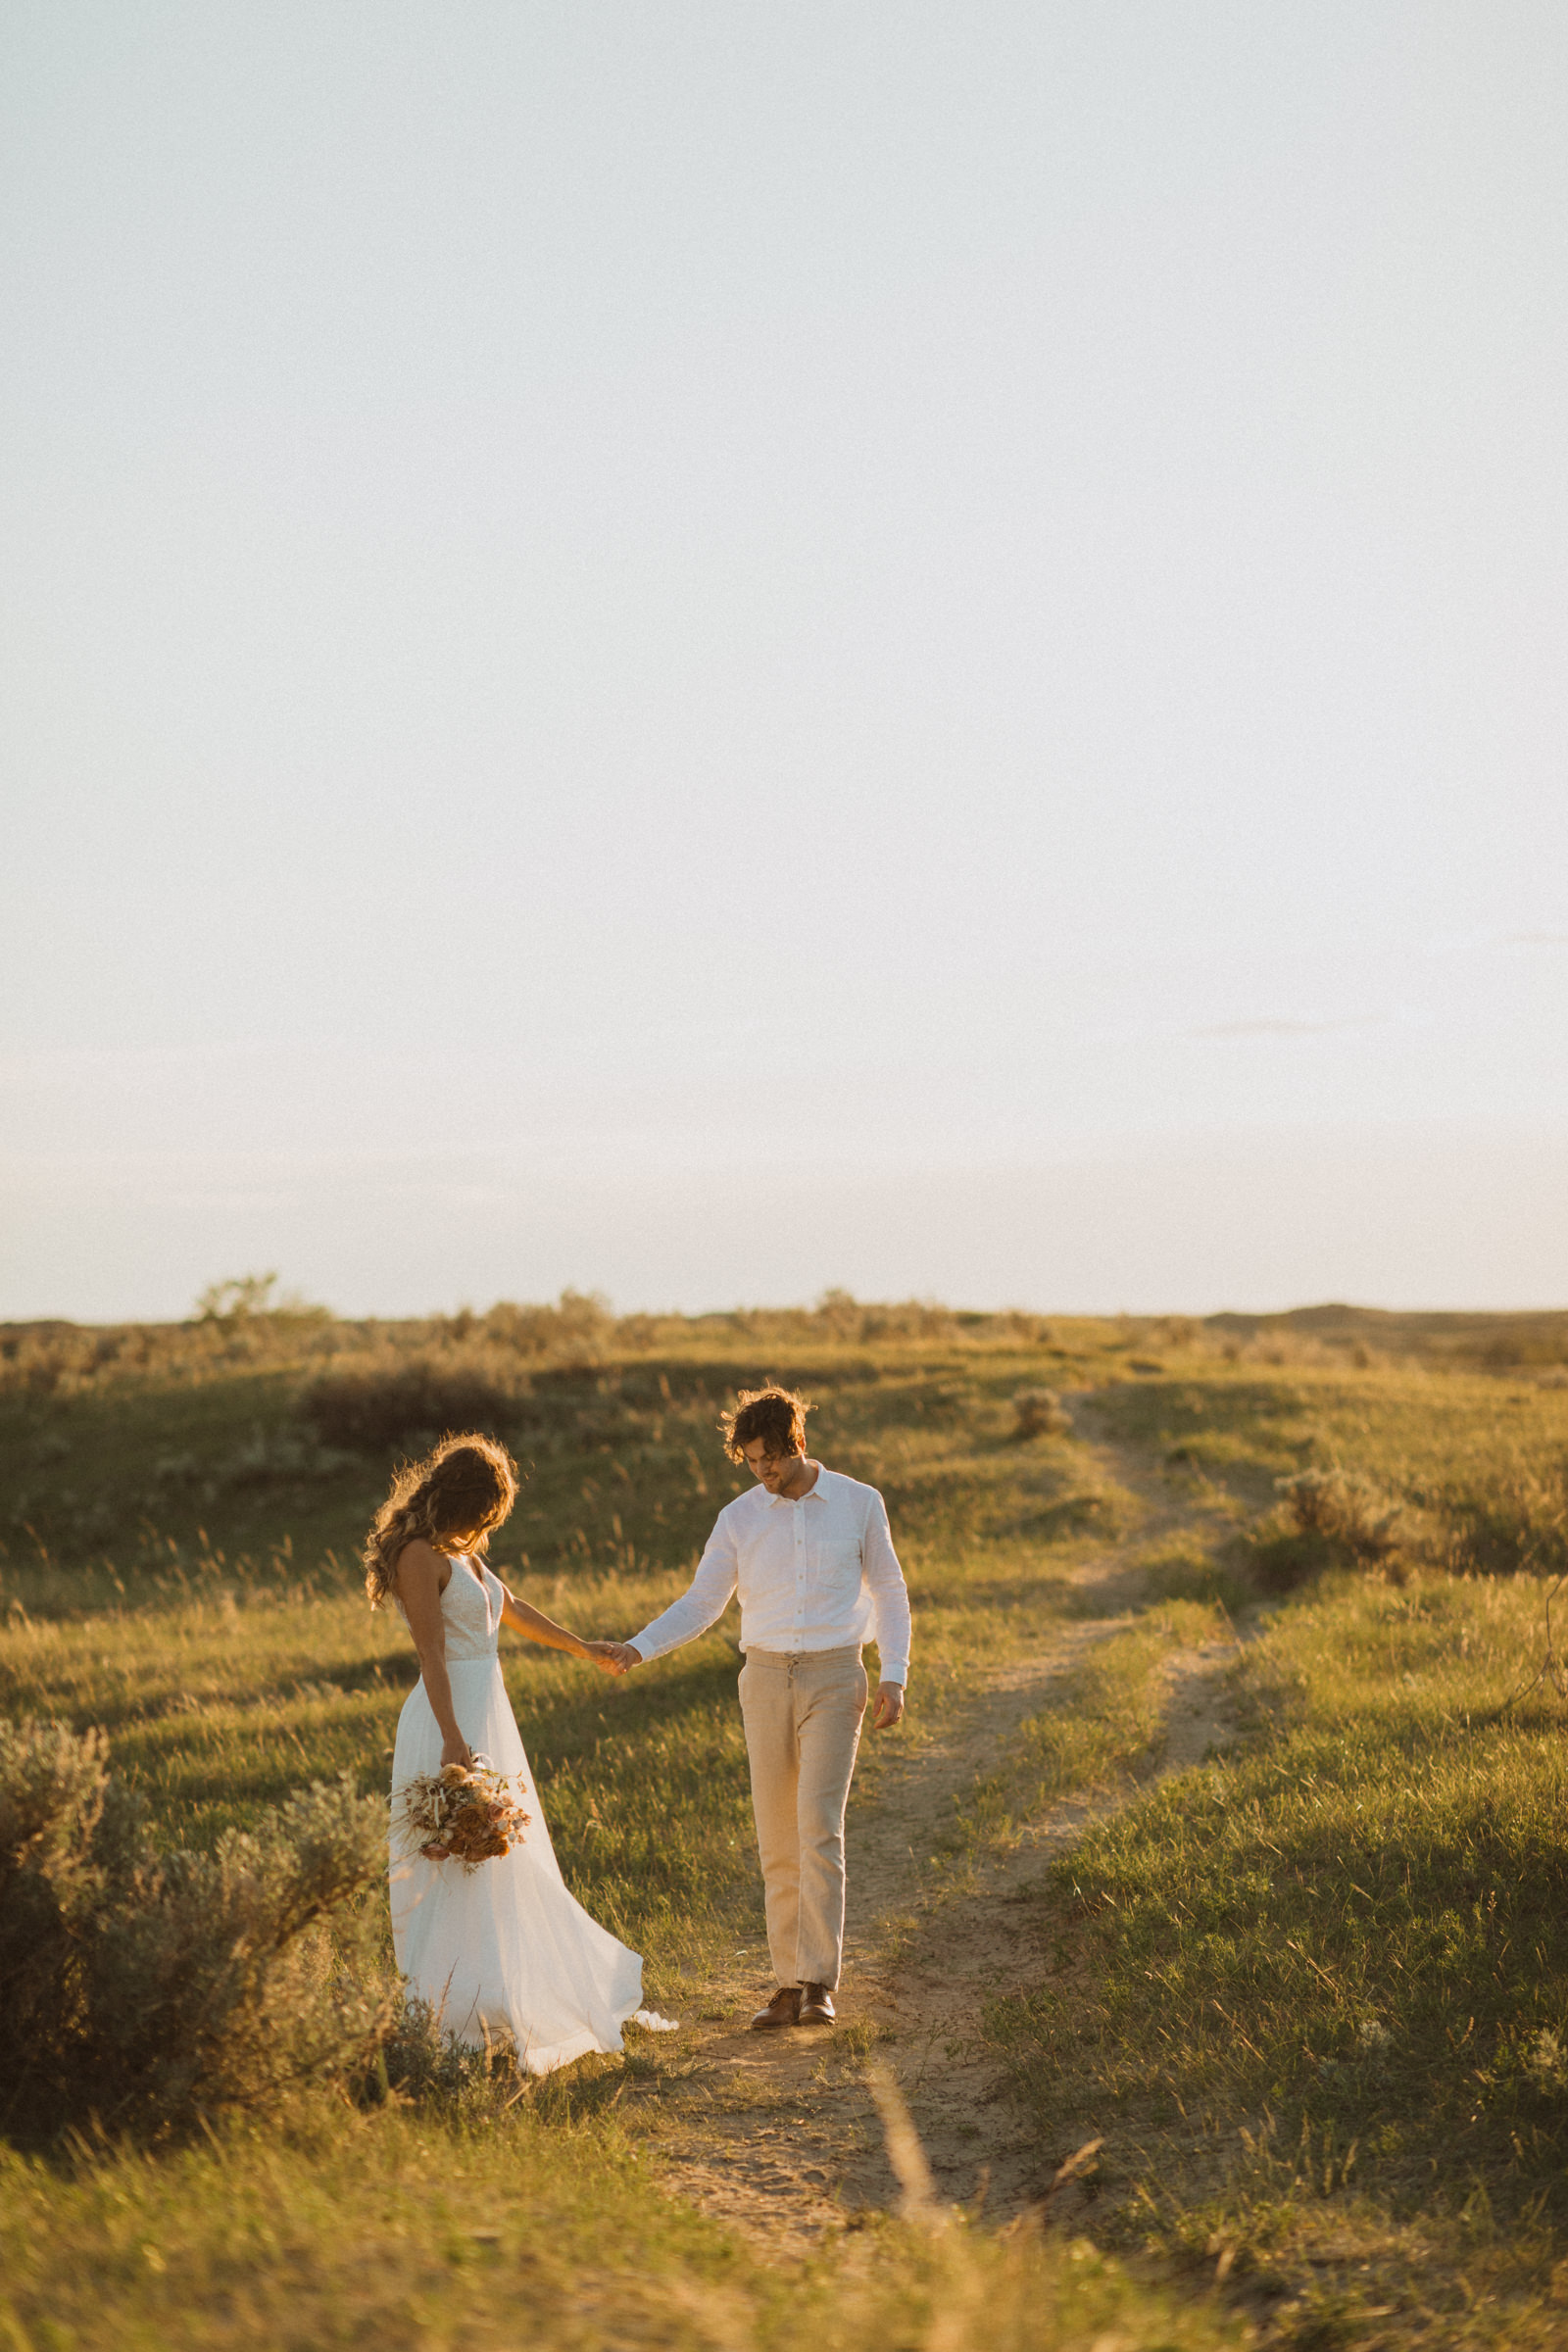 groom admiring his bride. boho wedding dress from exquisite and linen suit